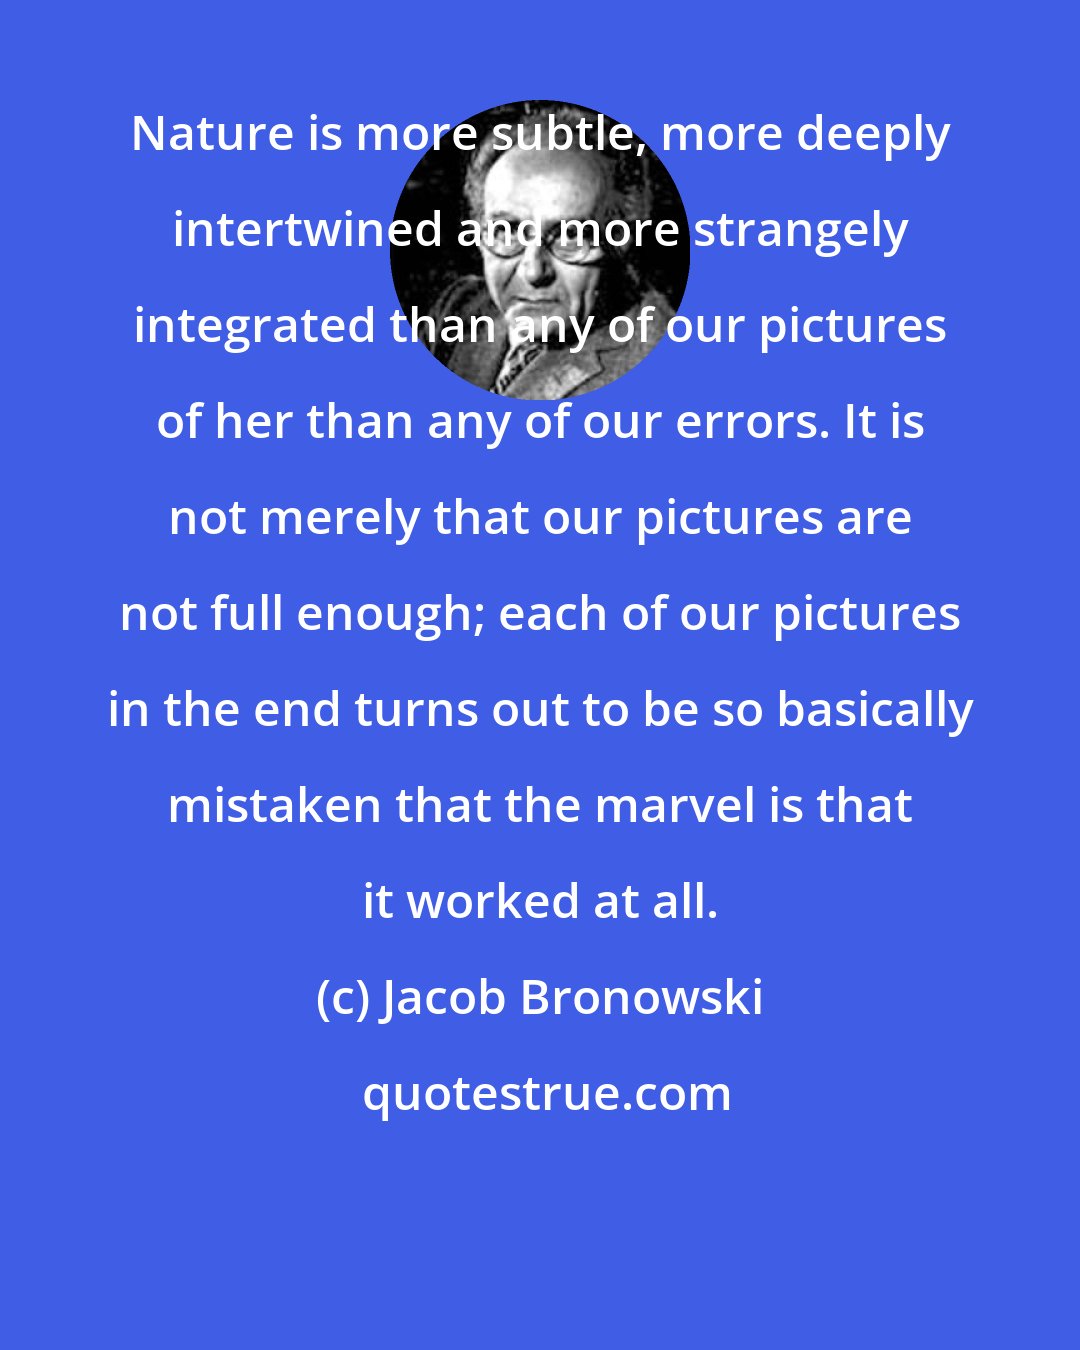 Jacob Bronowski: Nature is more subtle, more deeply intertwined and more strangely integrated than any of our pictures of her than any of our errors. It is not merely that our pictures are not full enough; each of our pictures in the end turns out to be so basically mistaken that the marvel is that it worked at all.